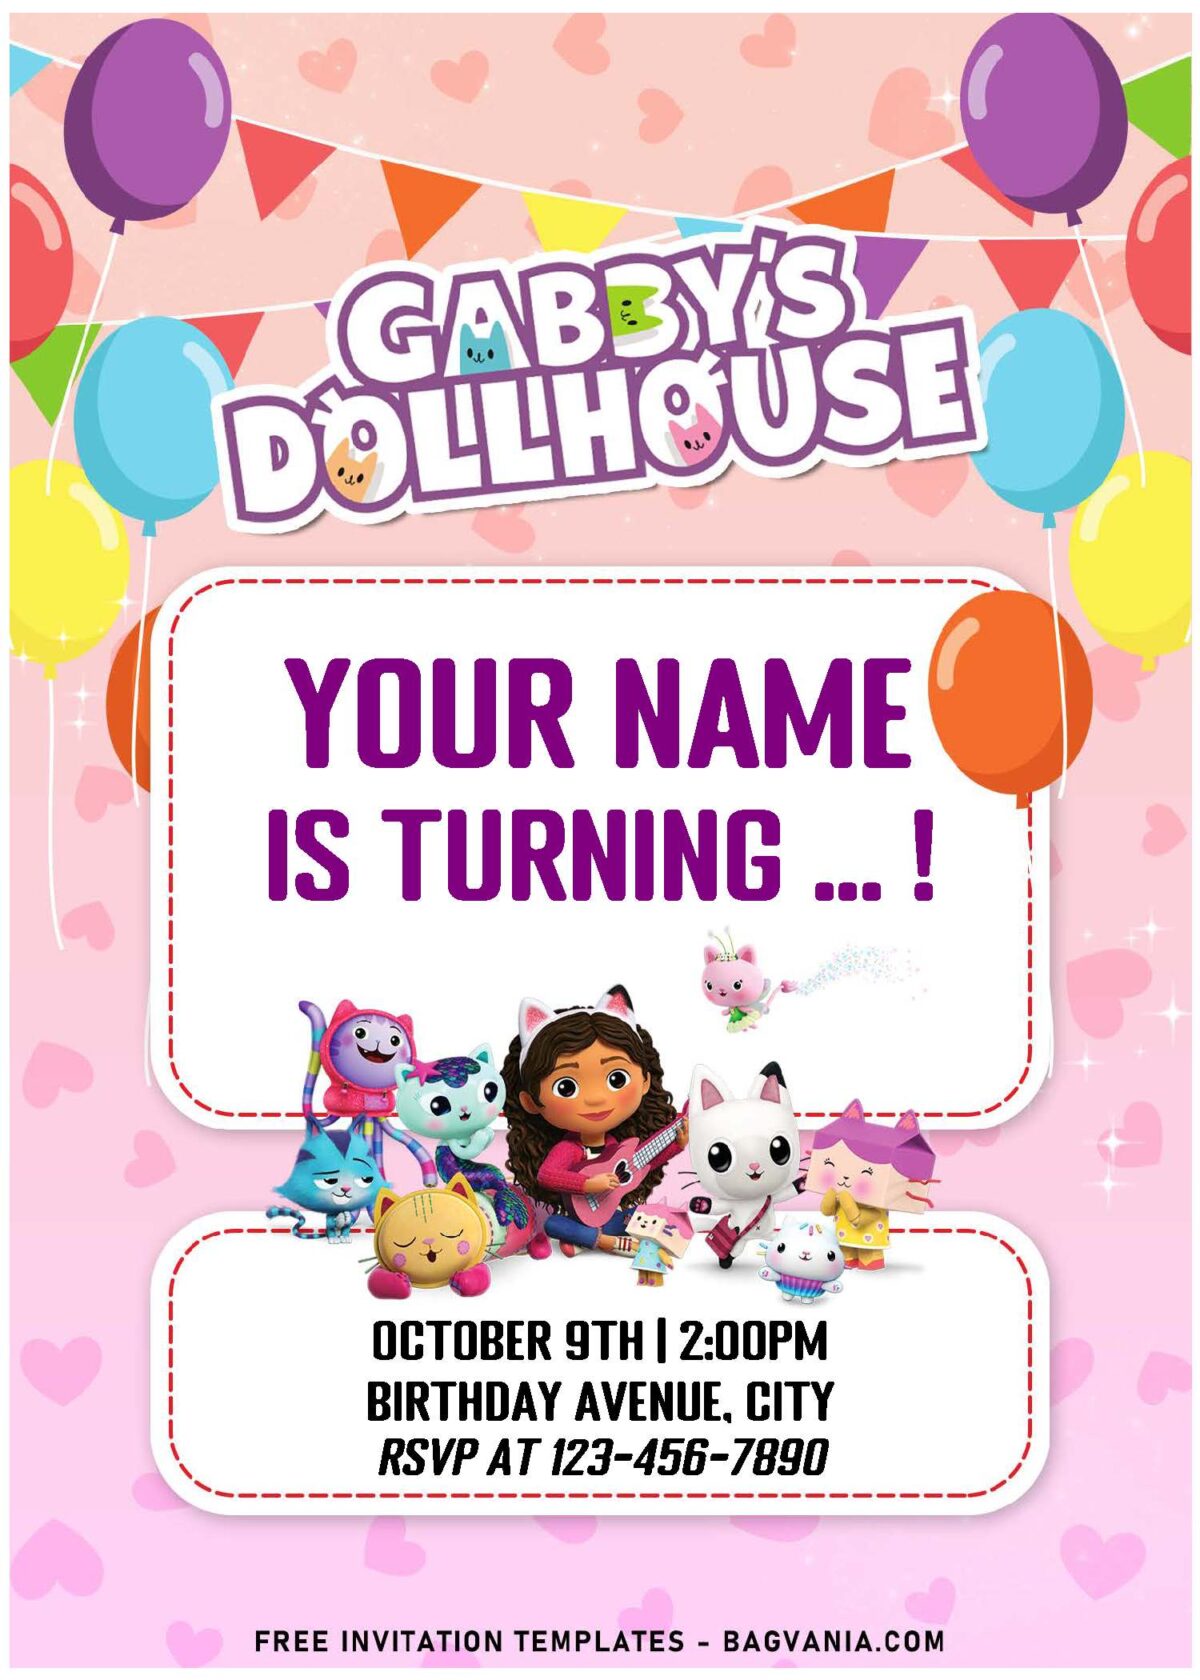 (Free Editable PDF) Purr-fect Gabby's Dollhouse Birthday Invitation Templates with party popper and bunting flags